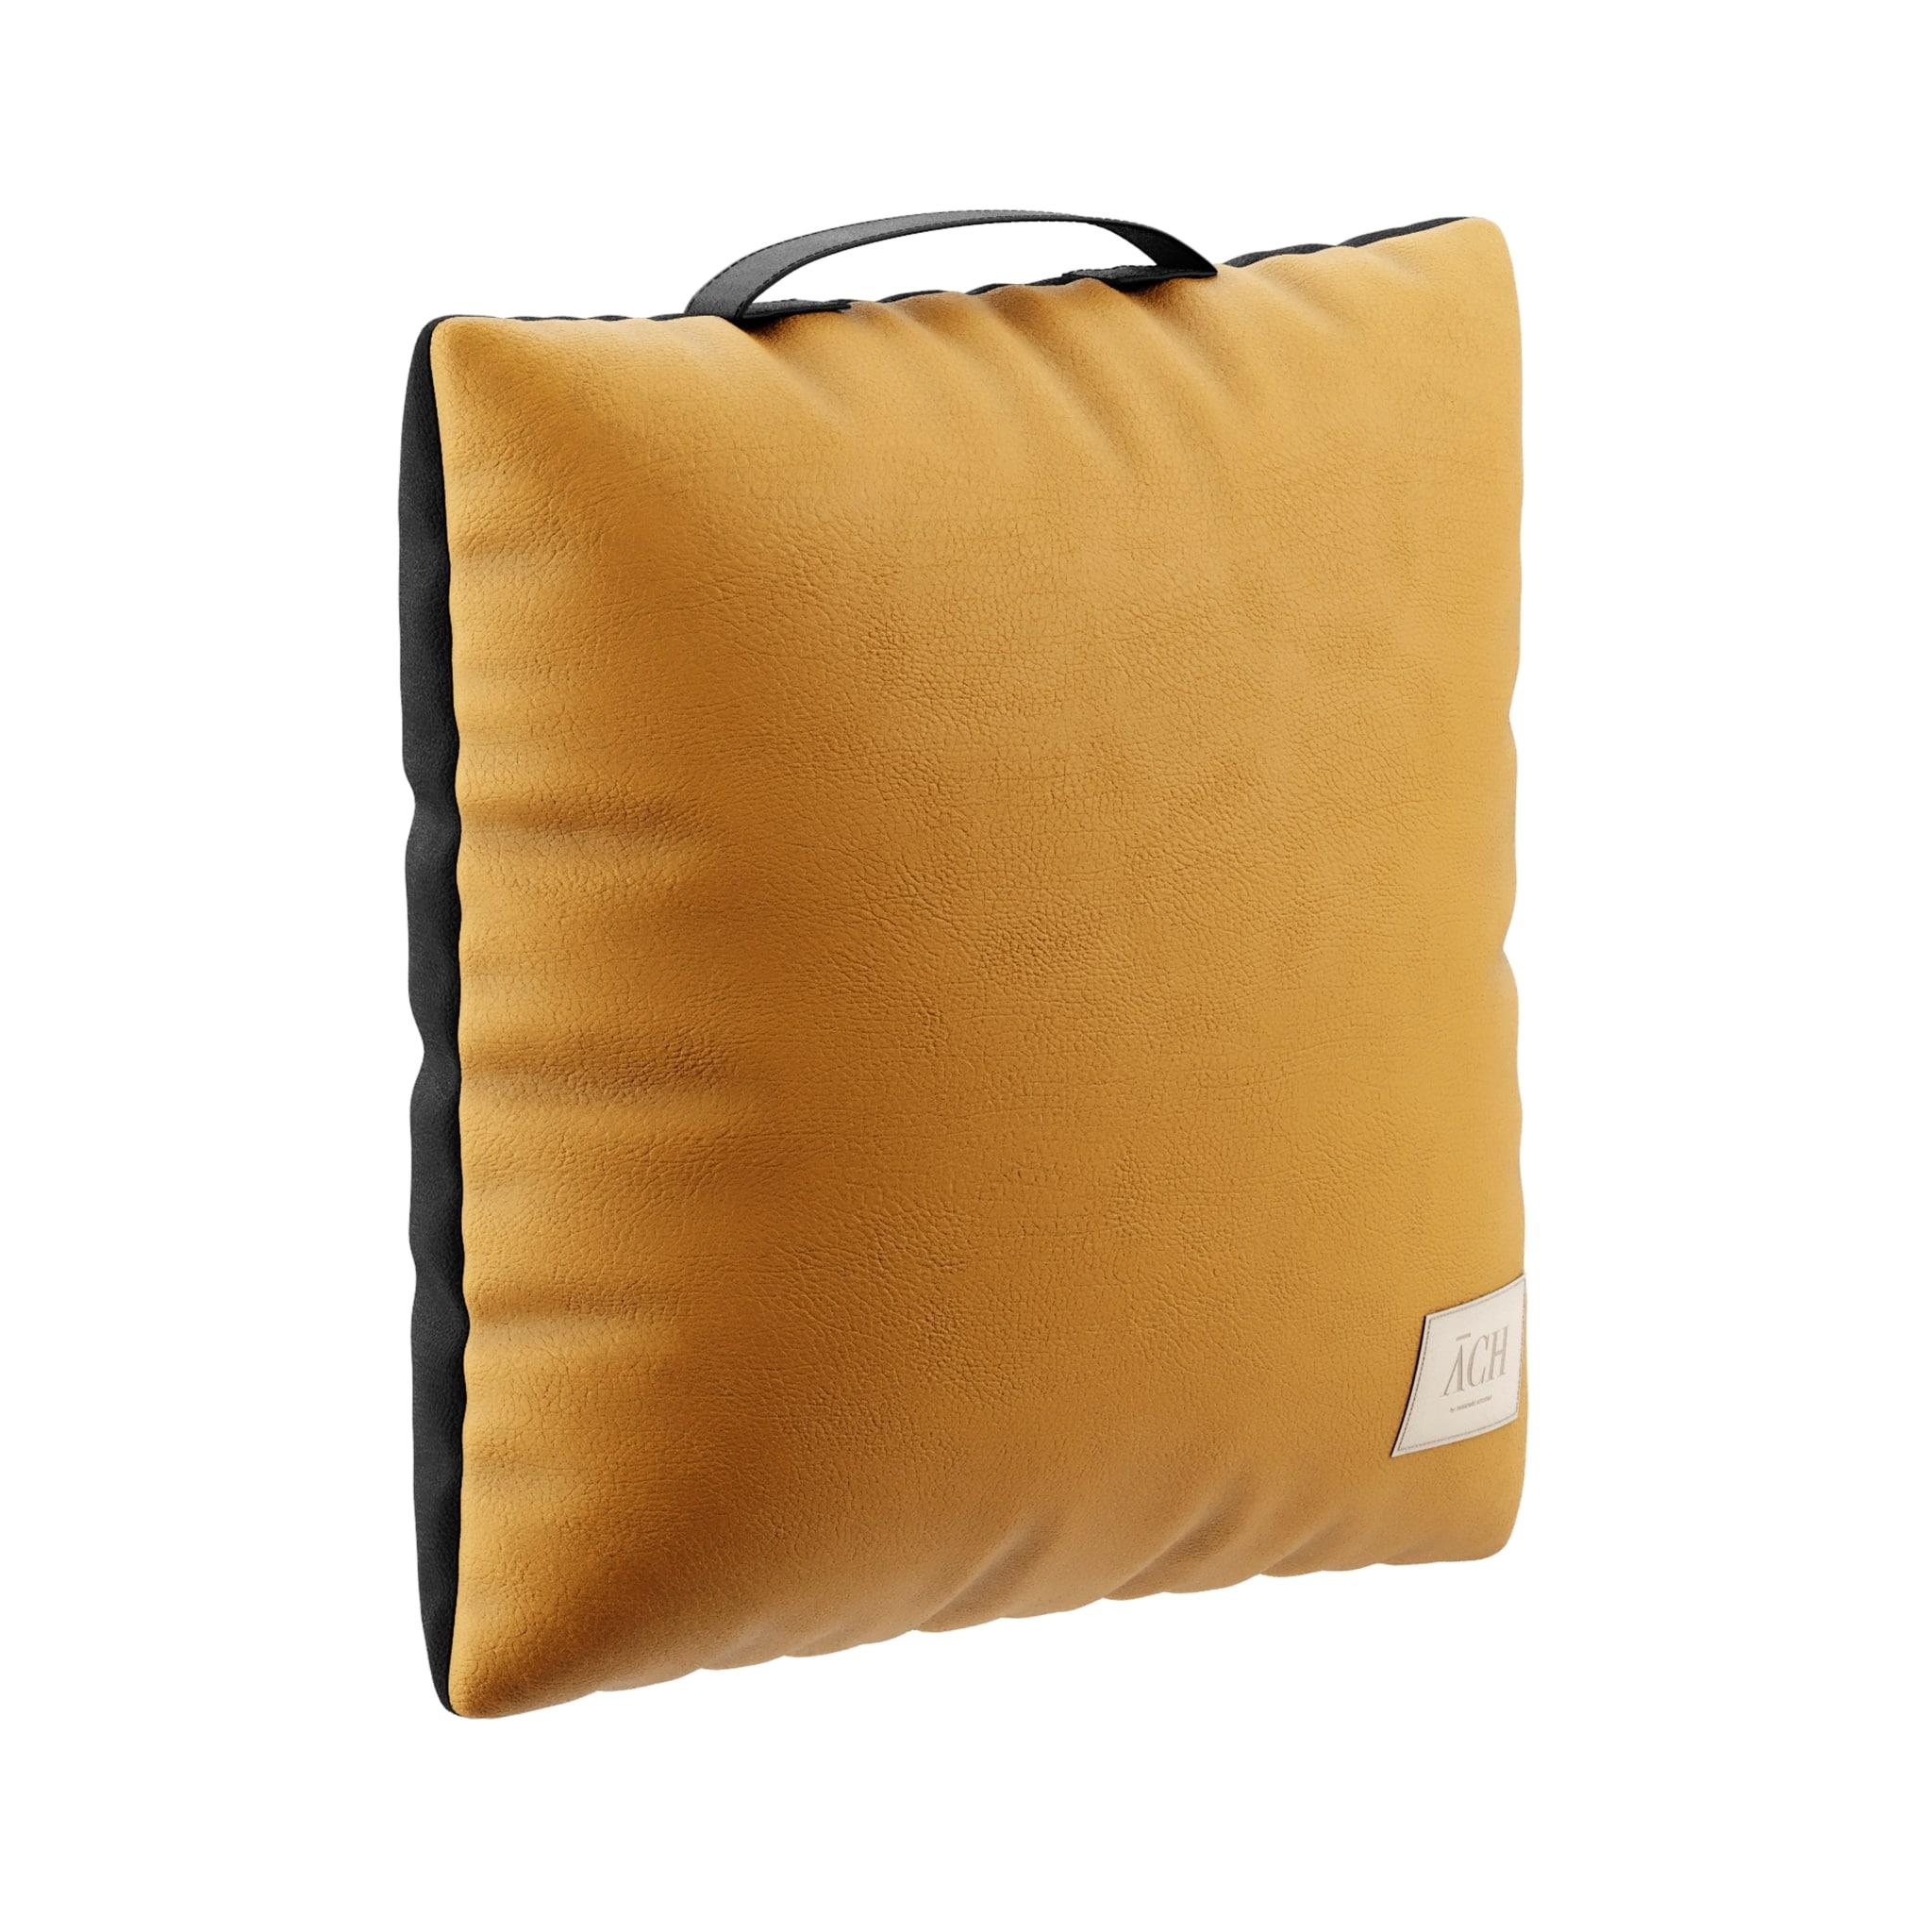 Portuguese Yellow Outdoor Throw Pillow, Modern Waterproof Square Cushion Decor Handle